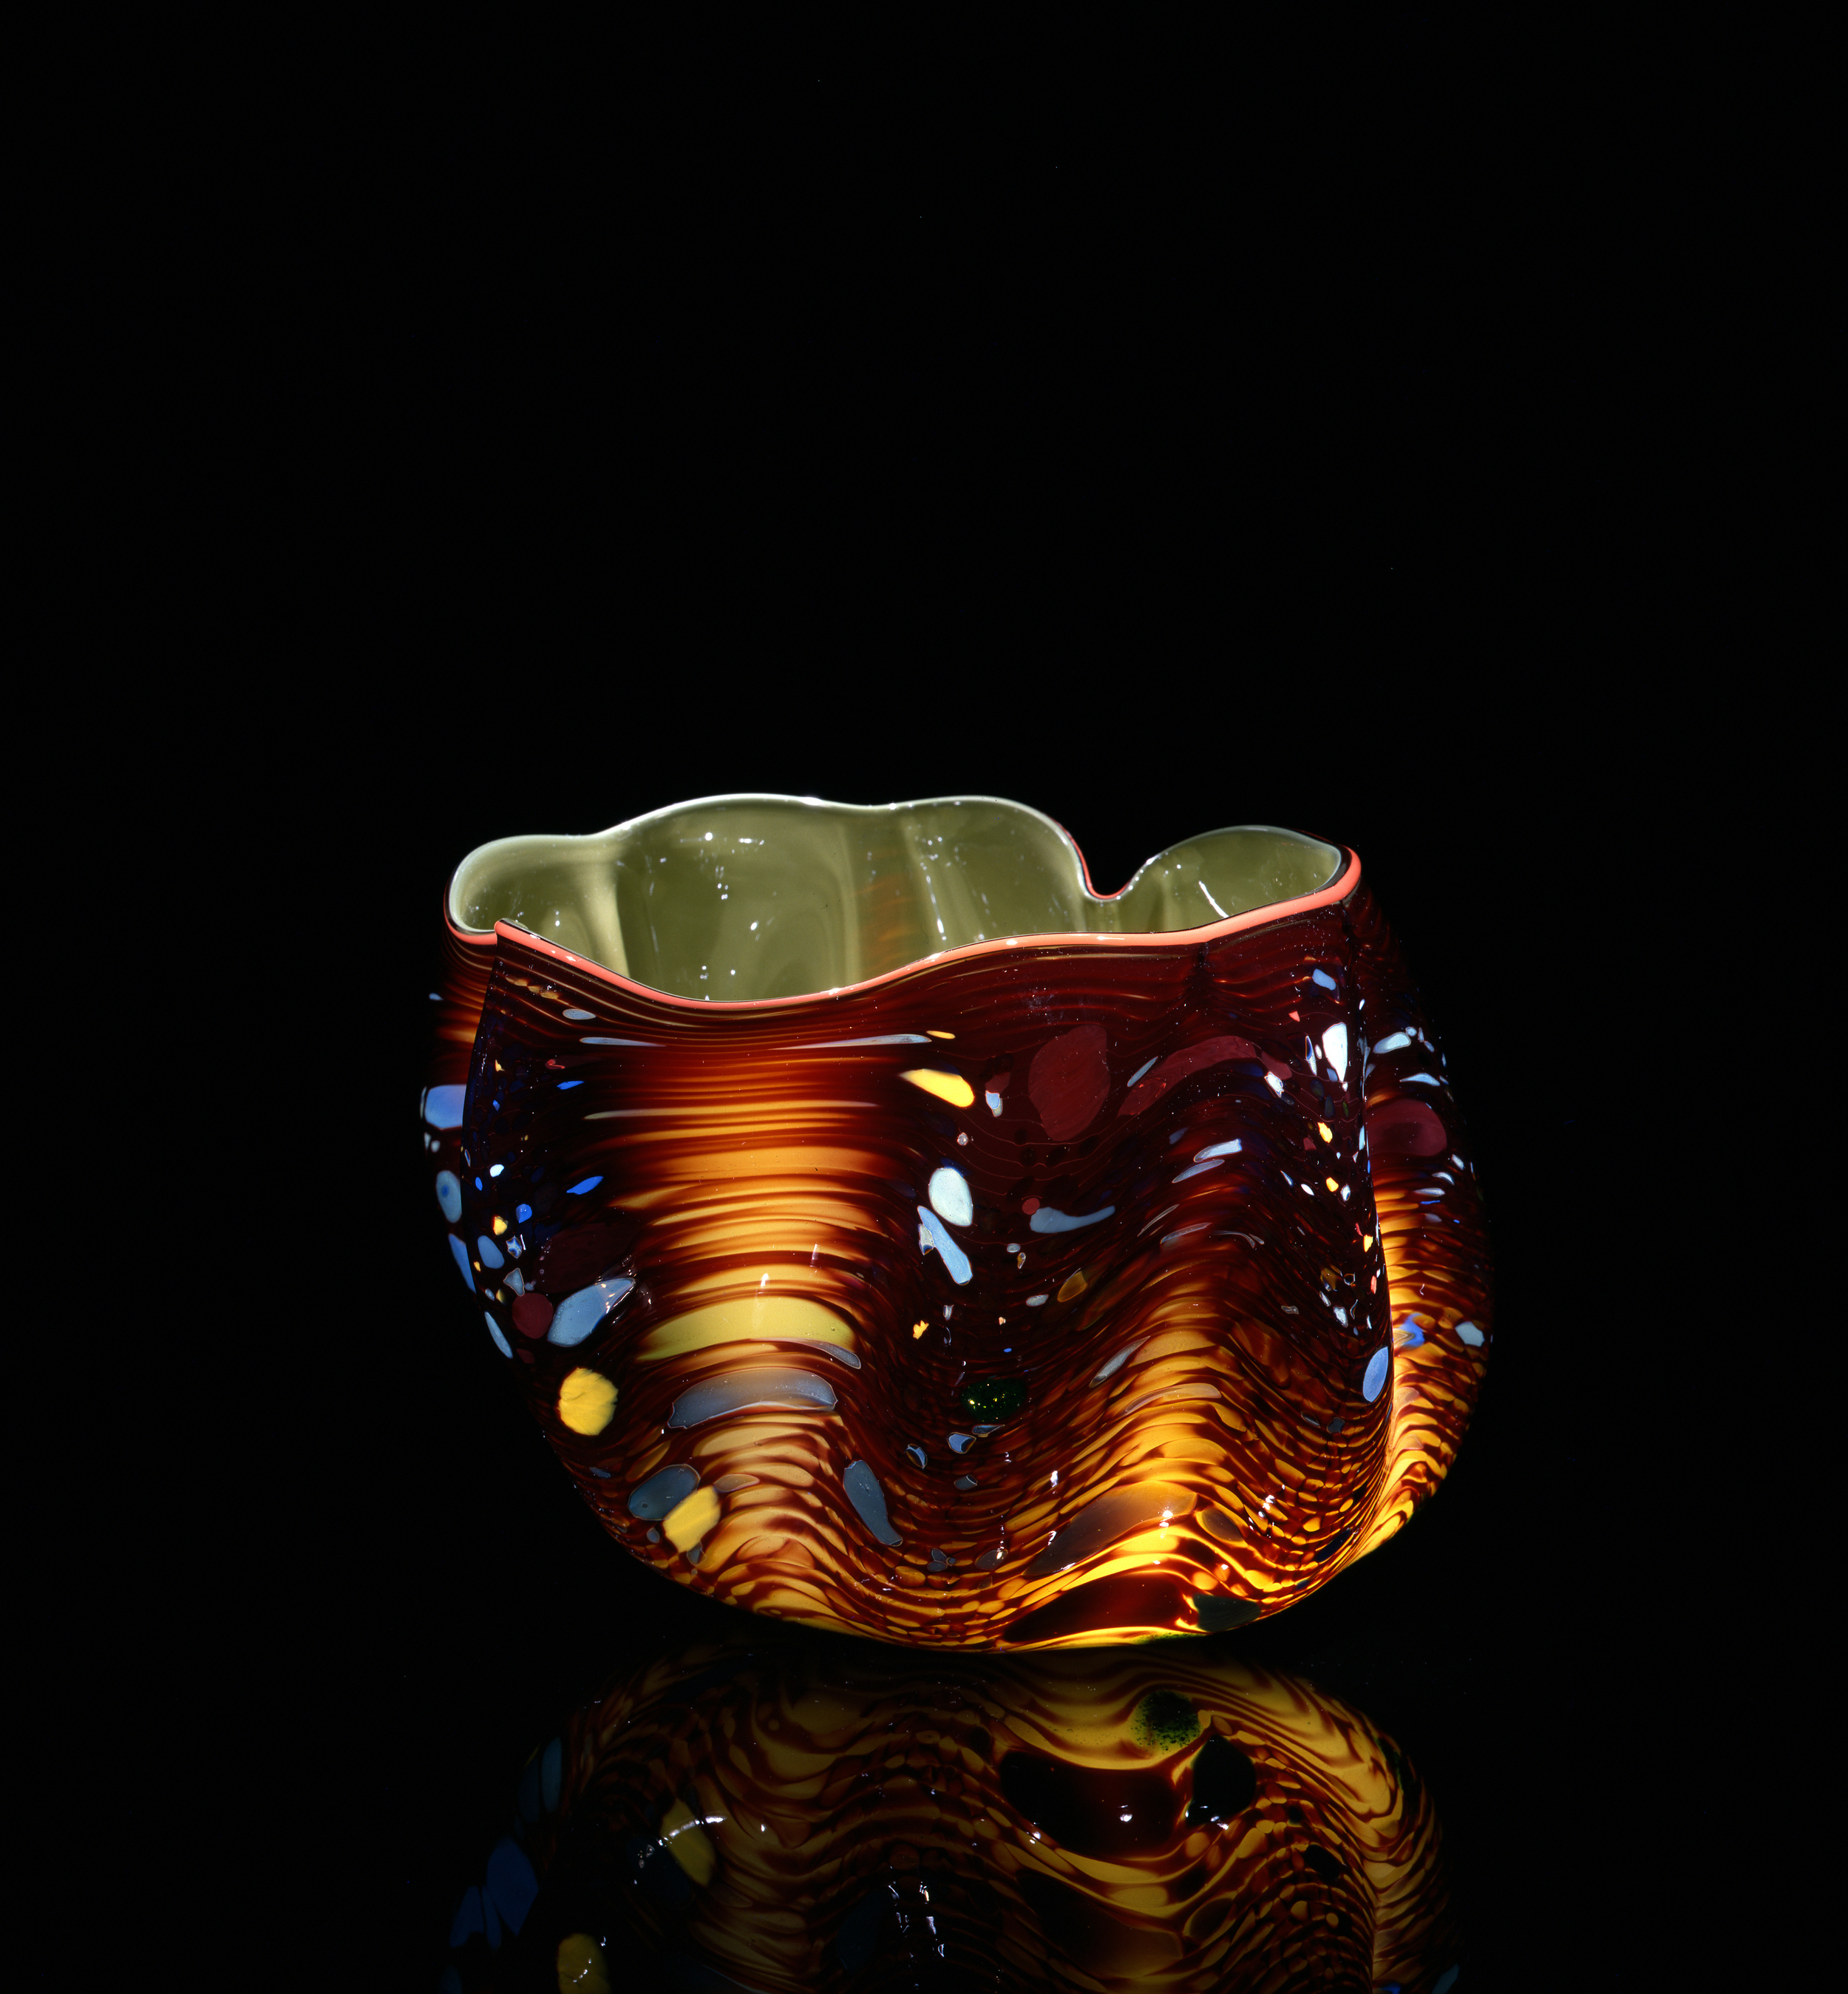  Dale Chihuly,&nbsp; May Green Macchia with Peach Lip Wrap&nbsp; (1982, glass, 5 x 6&nbsp;x 6 inches), DC.126 